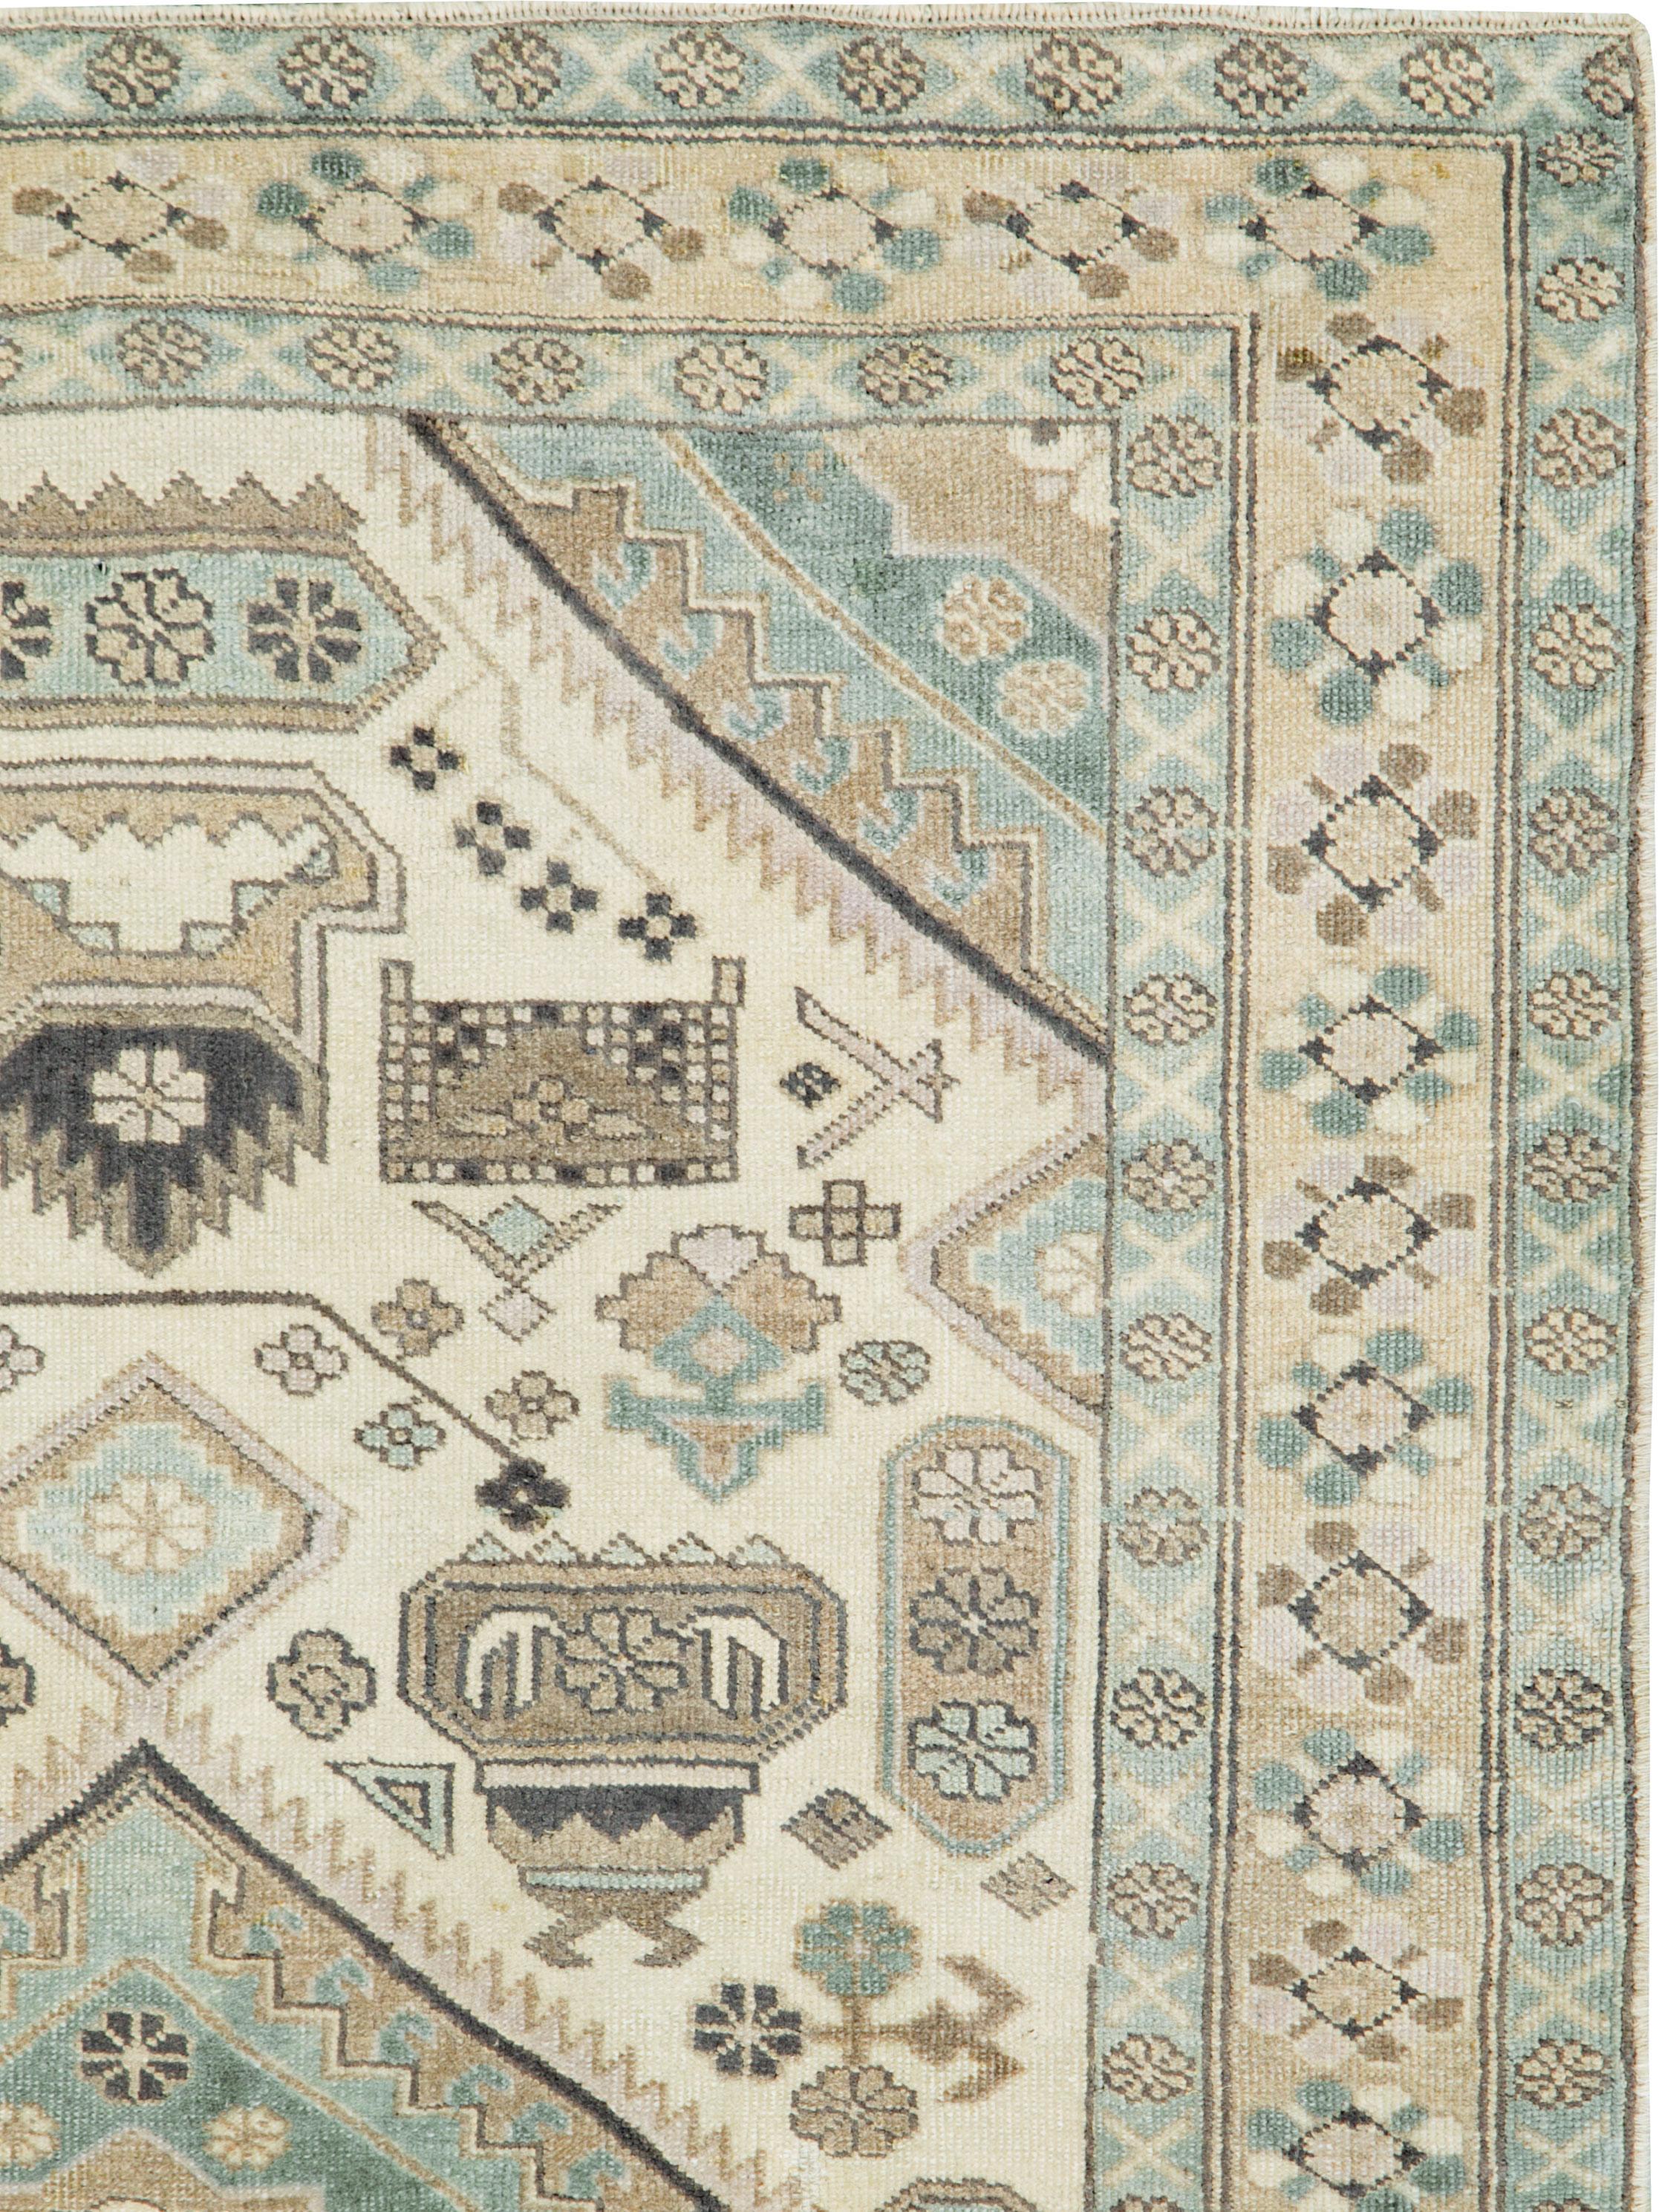 A vintage Persian Ardebil rug from the mid-20th century.